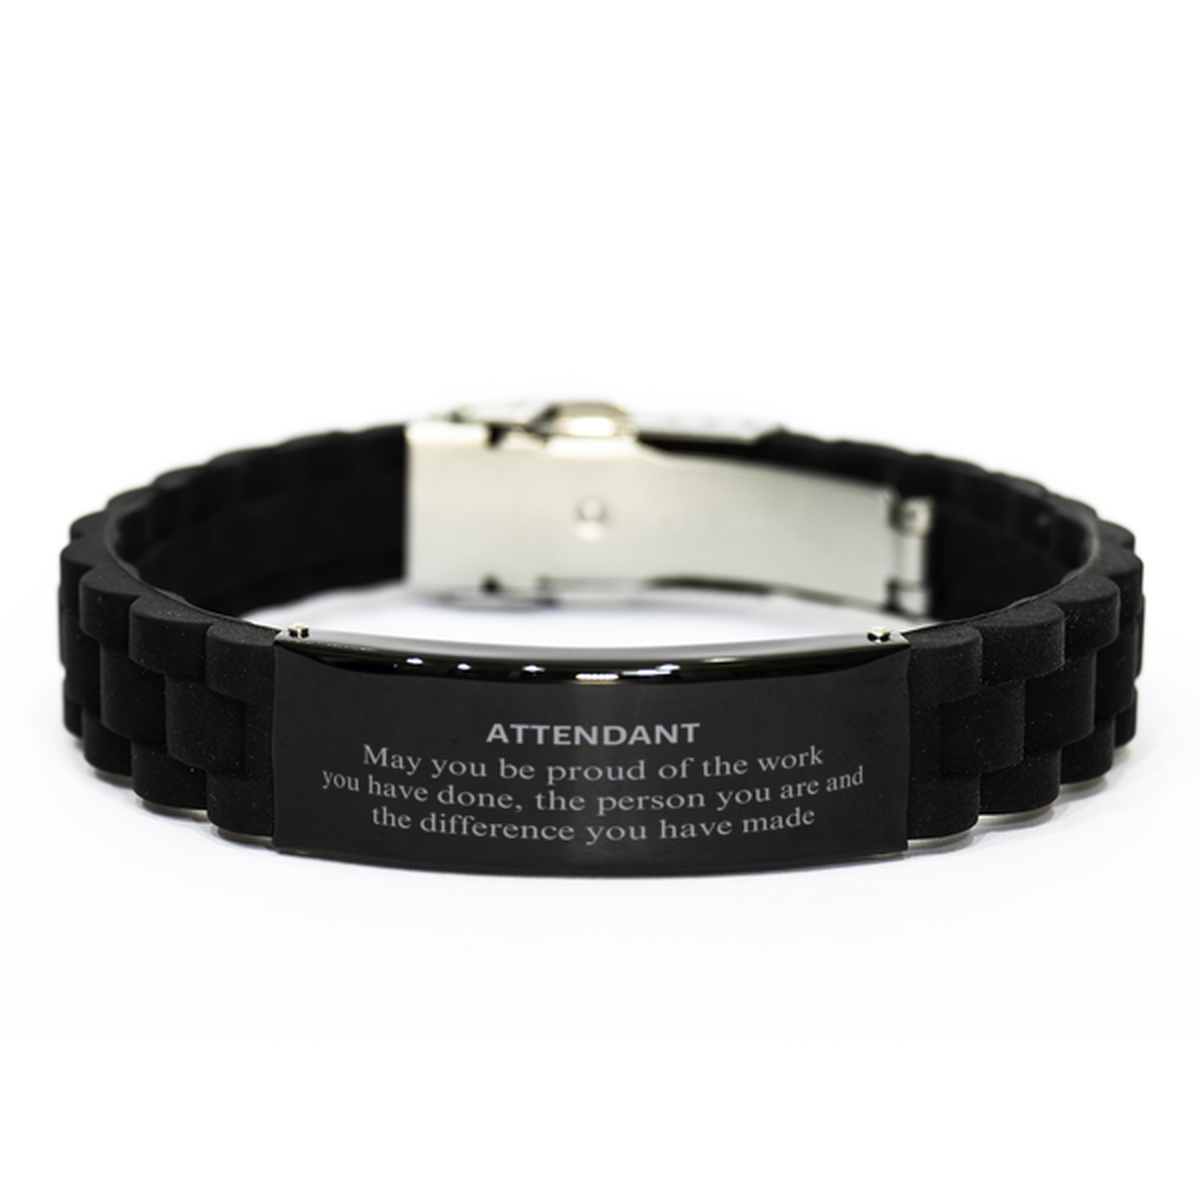 Attendant May you be proud of the work you have done, Retirement Attendant Black Glidelock Clasp Bracelet for Colleague Appreciation Gifts Amazing for Attendant